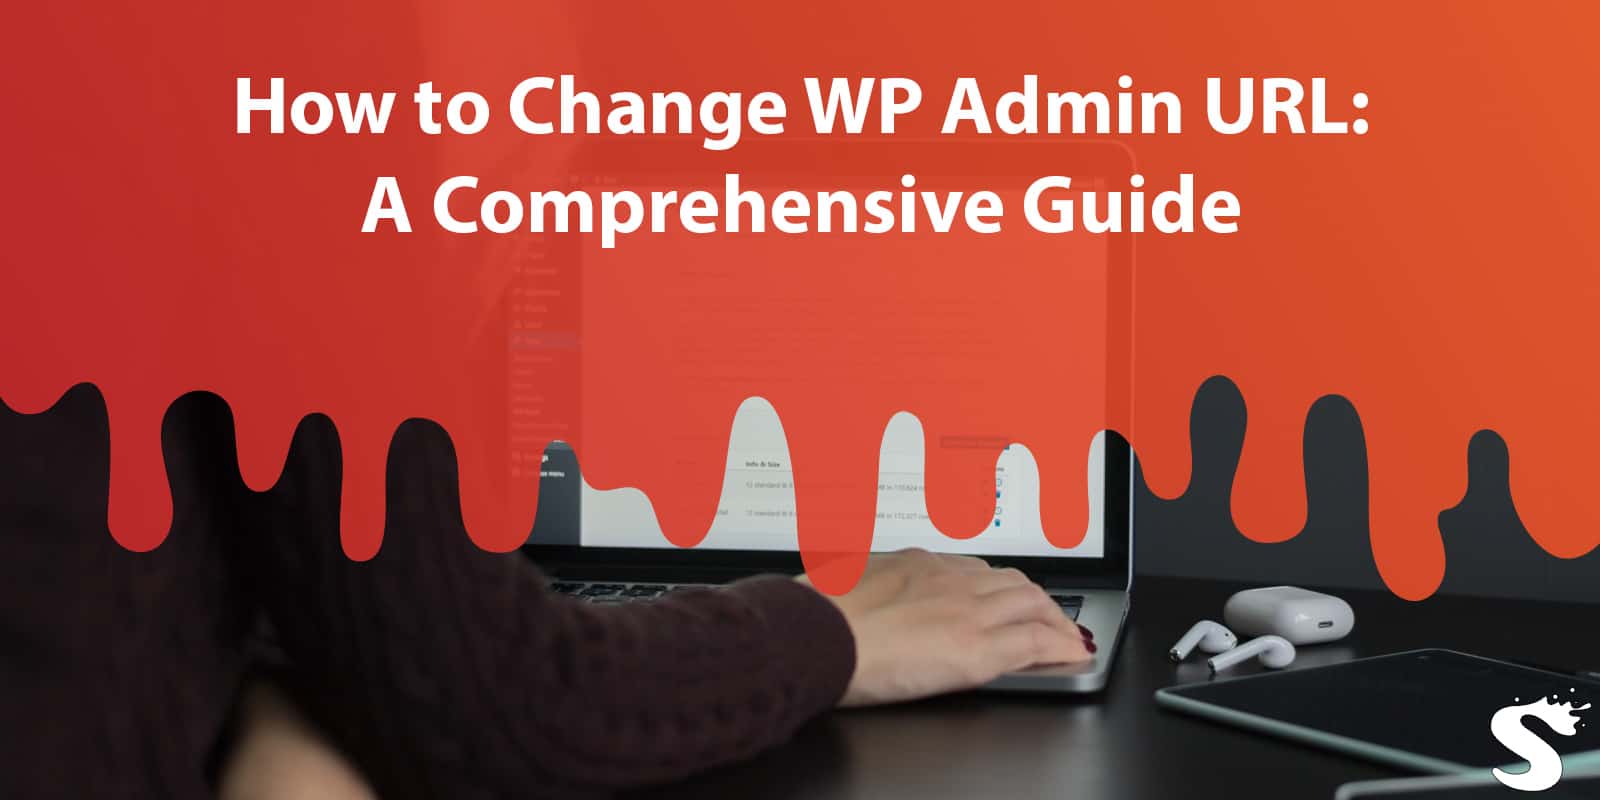 How to Change WP Admin URL